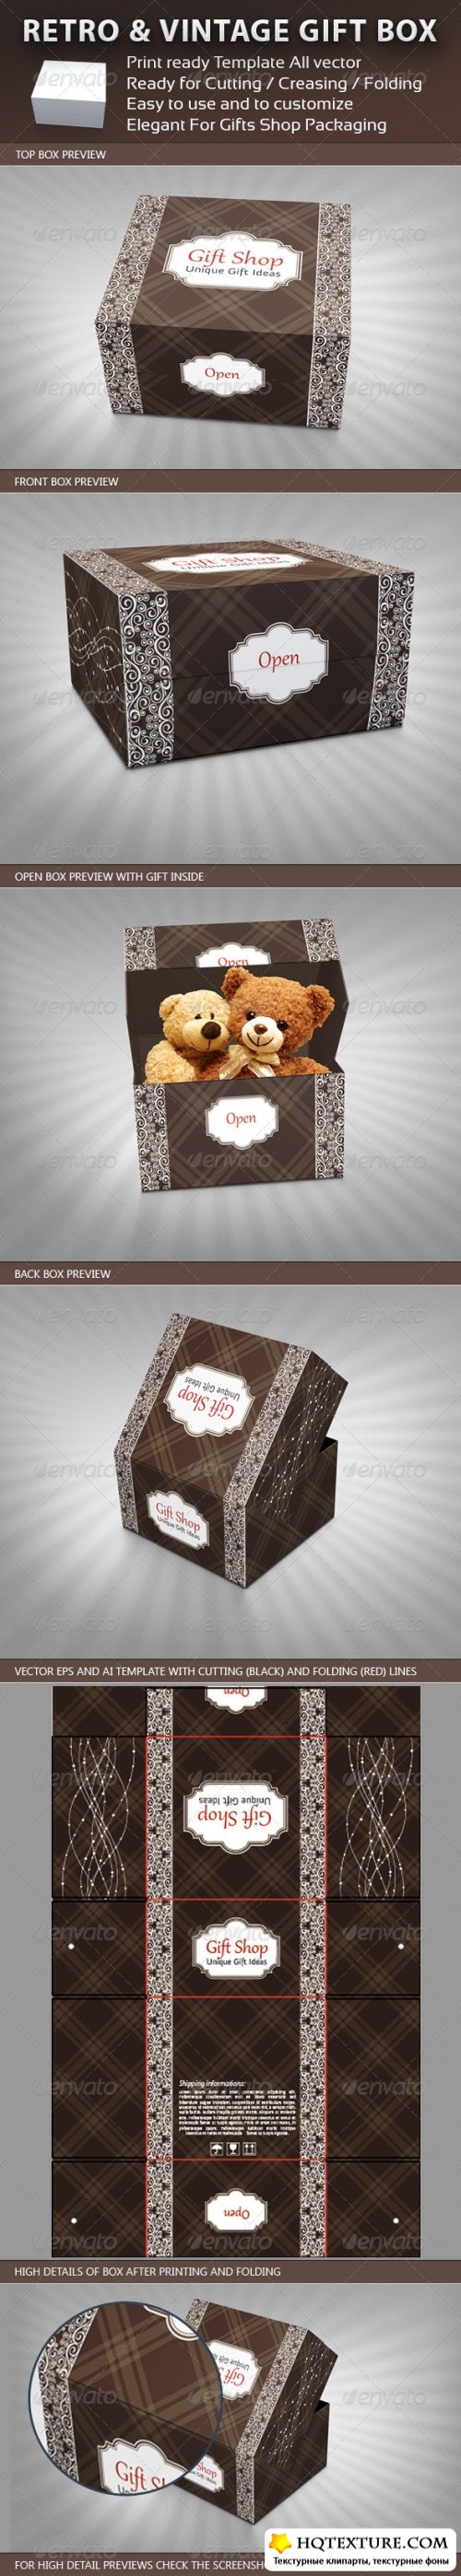 Retro and Vintage Gift Box Package Template 